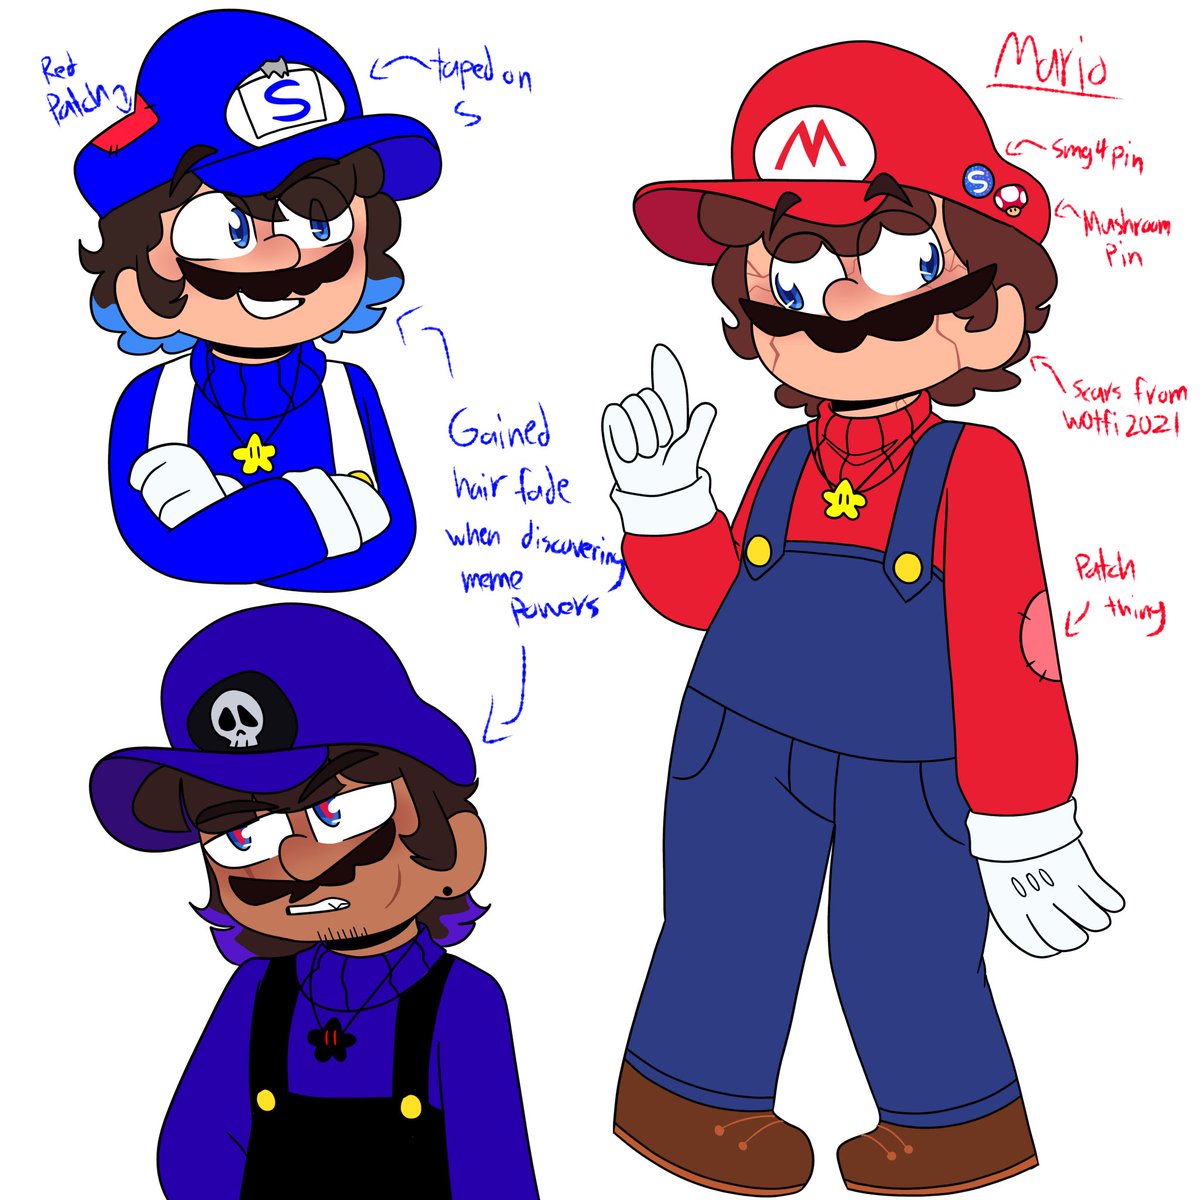 Maryo the one and only 
Plus OG SMG4 and 3 
🔴🔵🟣
[#SMG4 #smg4fanart #smg3 #smg4mario]